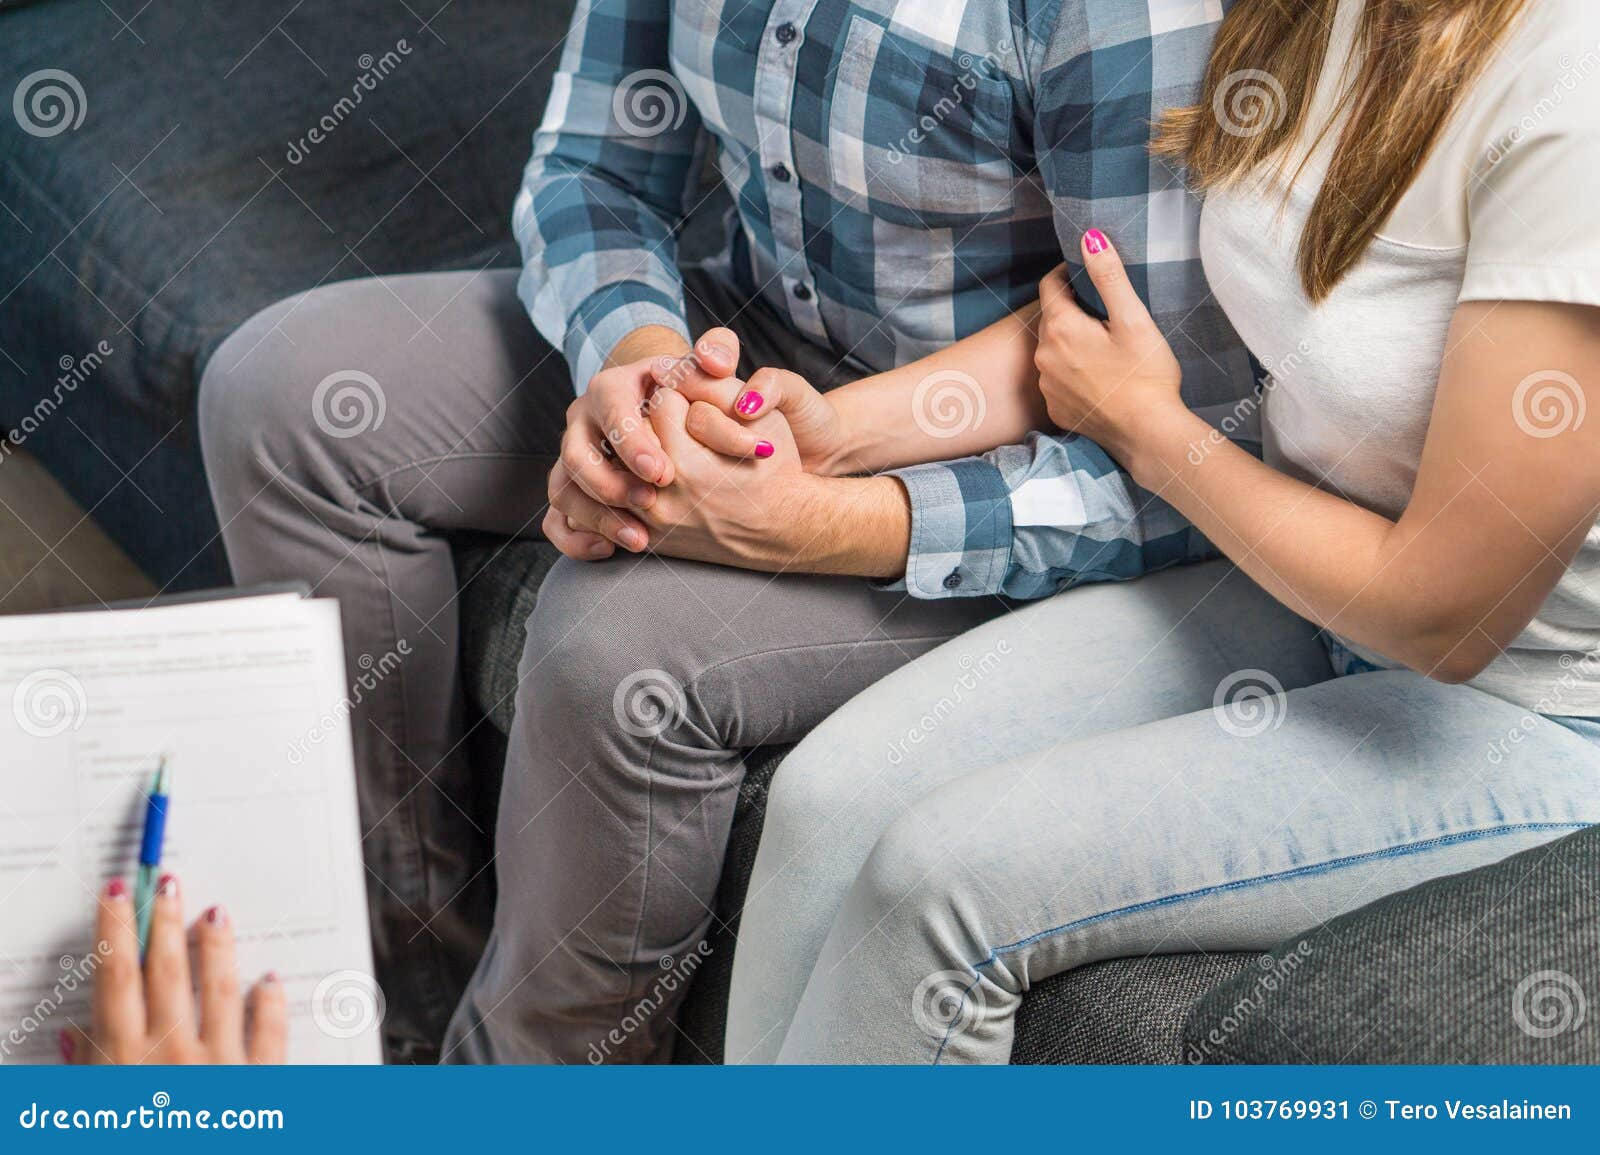 Couple In Therapy Or Marriage Counseling Stock Image Image Of Girl